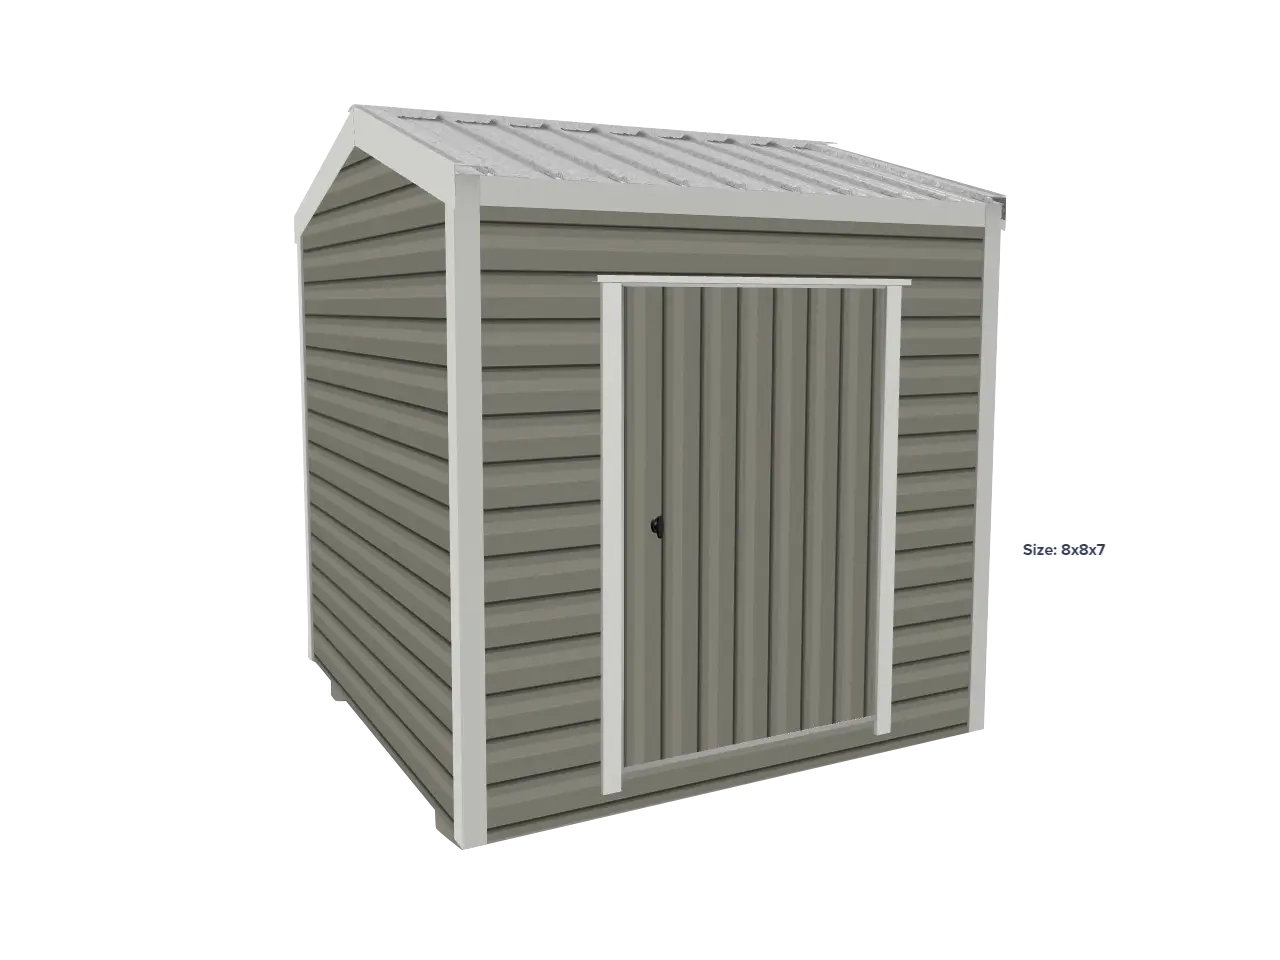 Compact small shed allows you to get organized with a 45 inch door.